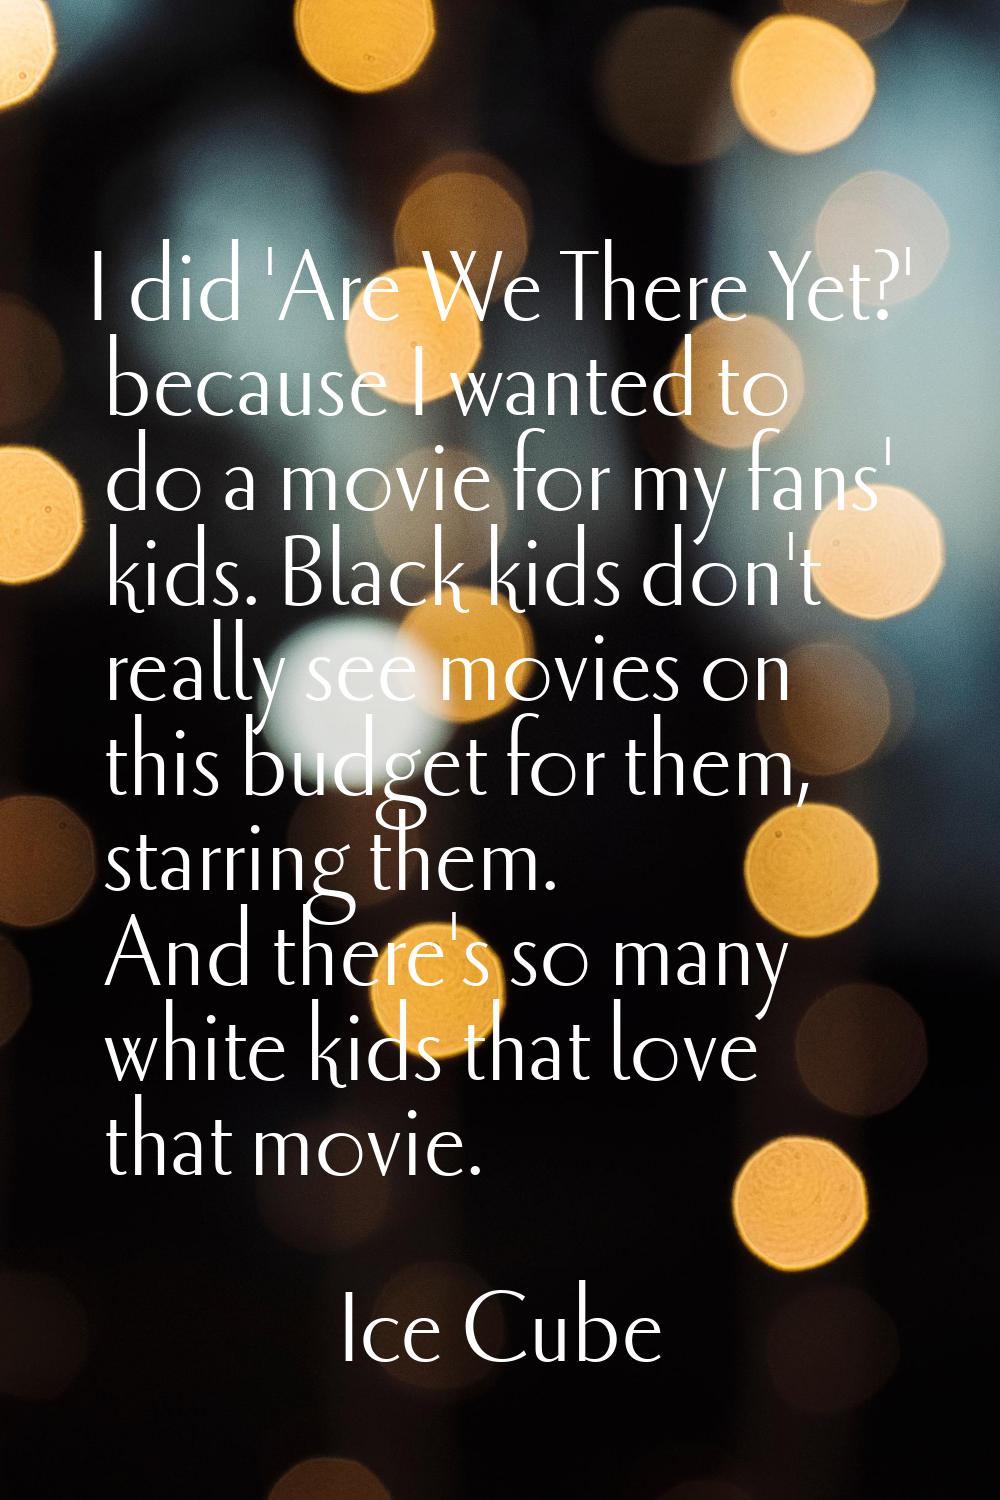 I did 'Are We There Yet?' because I wanted to do a movie for my fans' kids. Black kids don't really